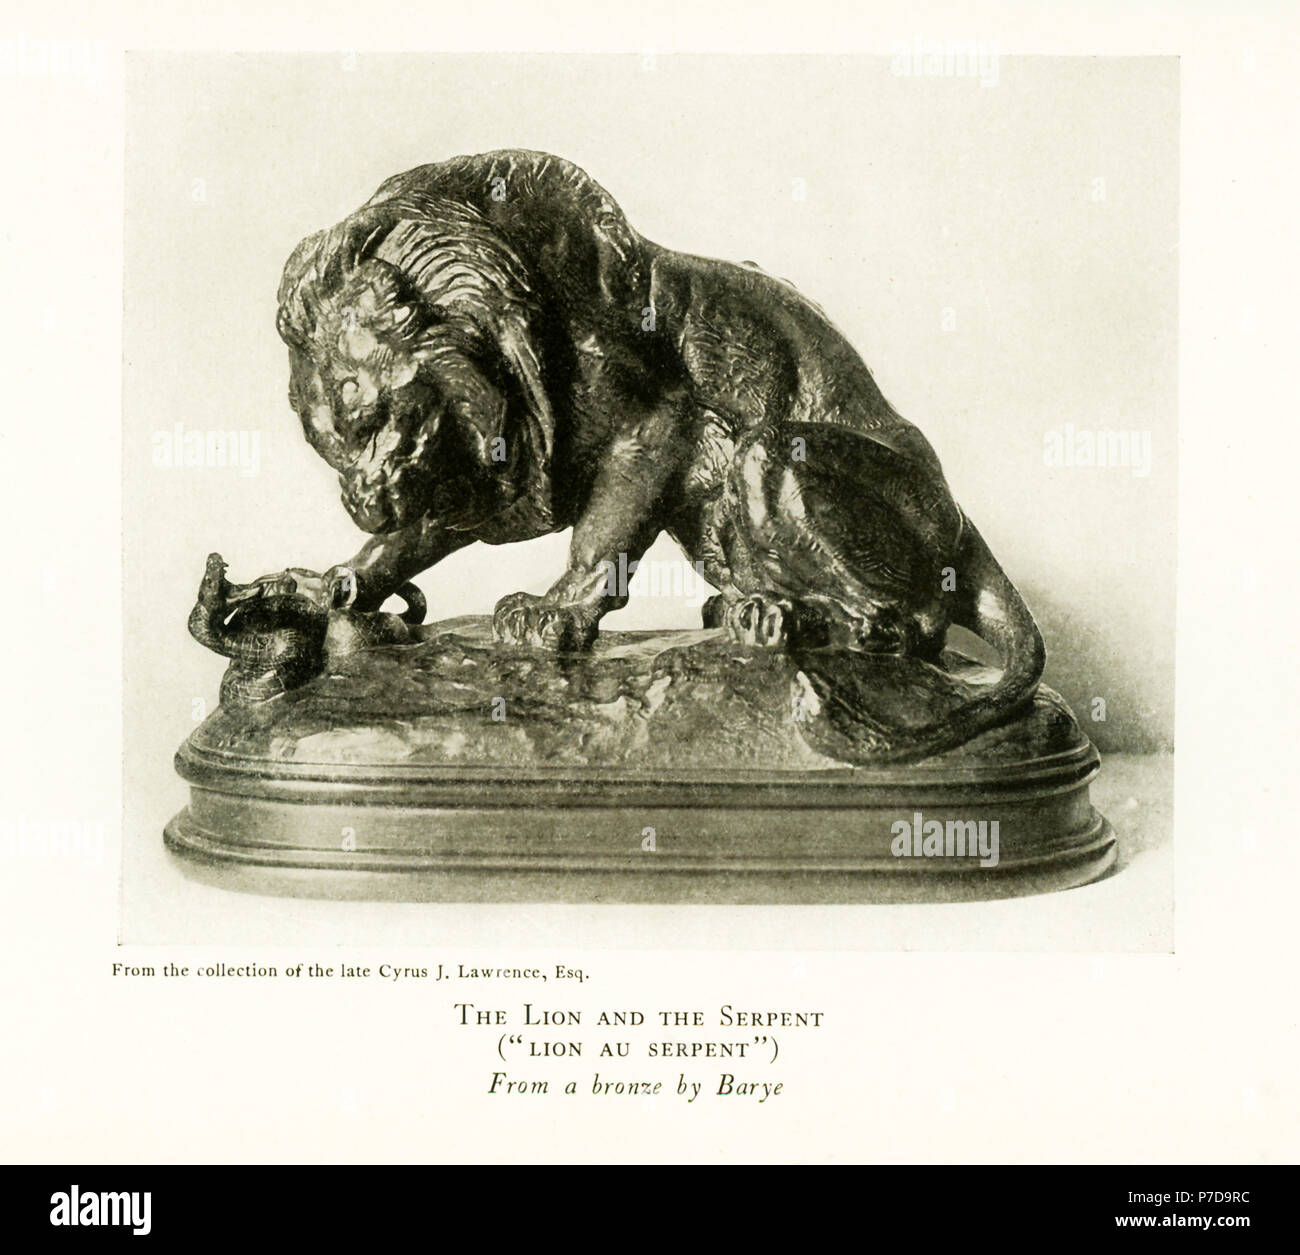 Antoine Louis Barye (1795-1875) was a Romantic French sculptor. He is best  known as a sculptor of animals (therefore, an animalier). This bronze  sculpture by Barye is titled “The Lion and the